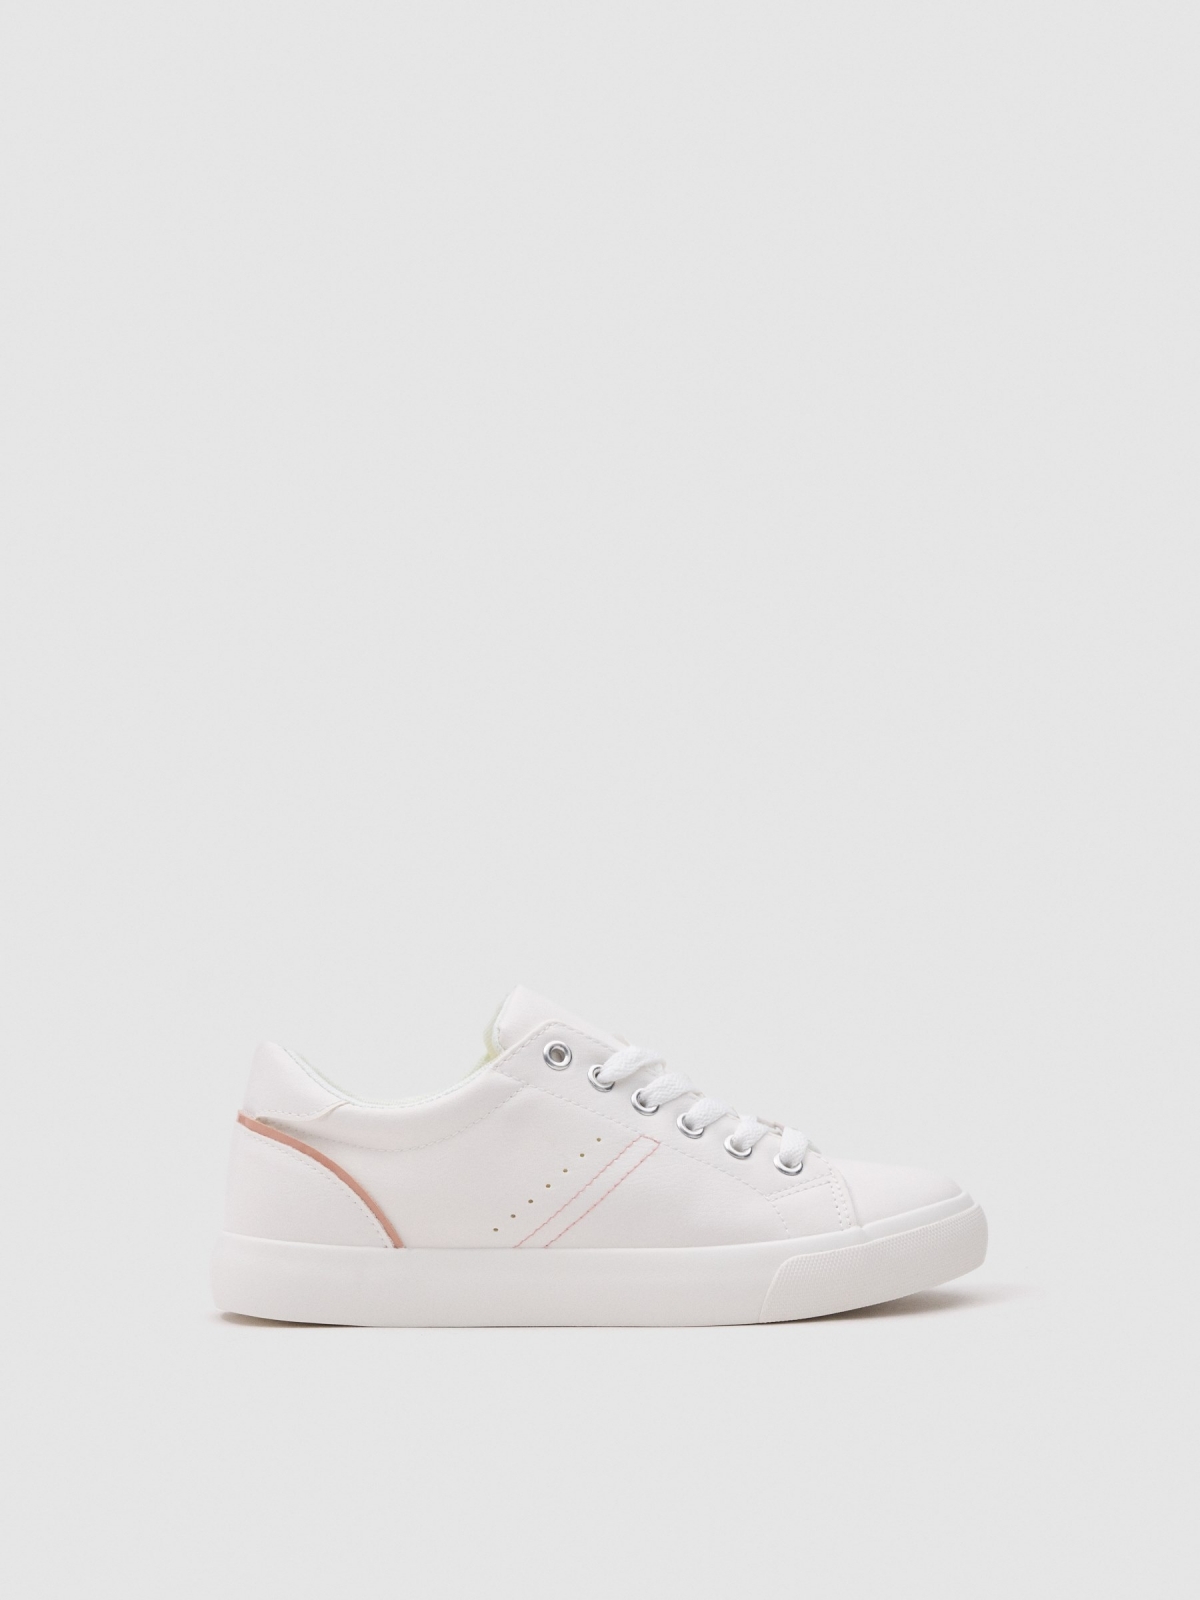 Basic Casual Sneaker off white